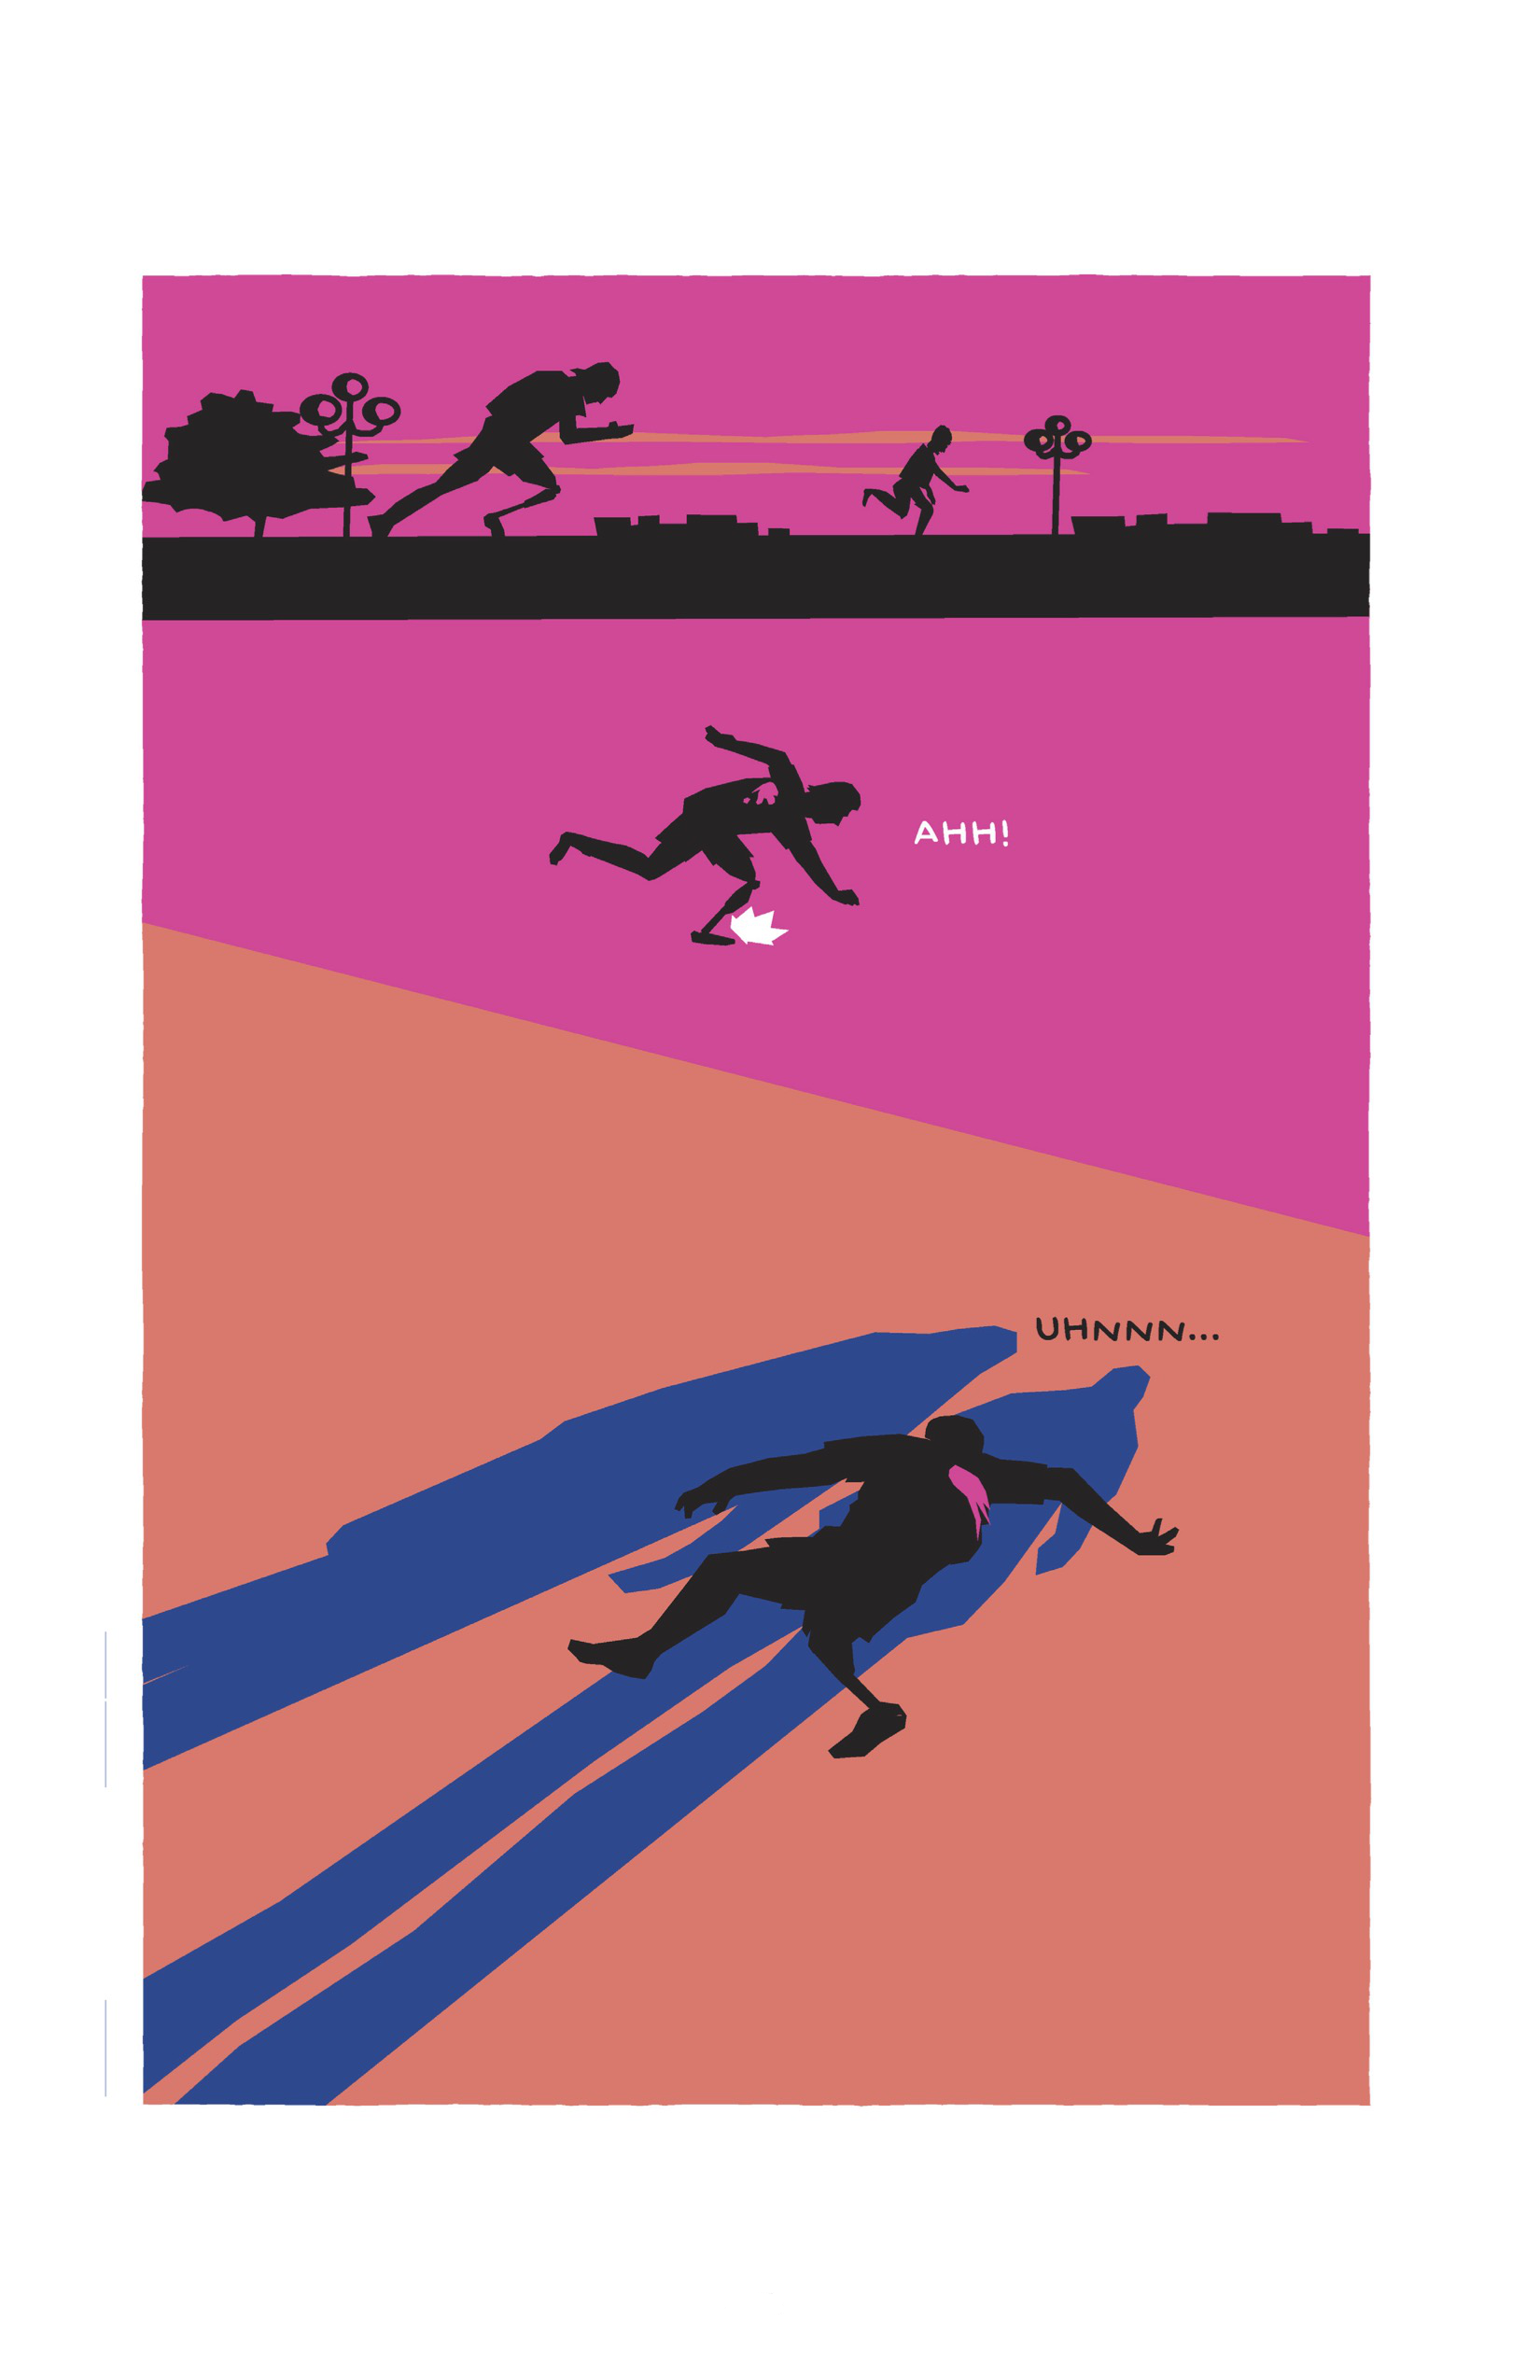 Now outside, Guy and his companion are sprinting down the road, black silhouettes against the pink sun. 
Guy is then isolated in a wash of pink, falling over as he takes another bullet to the back and one that hits near his foot. He yells out, â€œAHH!â€
Guyâ€™s limp body is lying on the ground, limbs splayed out at disjointed angles. A pink, bloody bullet wound stands out against his black silhouetted body. He groans, â€œUHNNNâ€¦â€ Two long blue shadows stretch out over him as the two men look down at their work. The background of this section of the page is peach orange, rather than hot pink. 